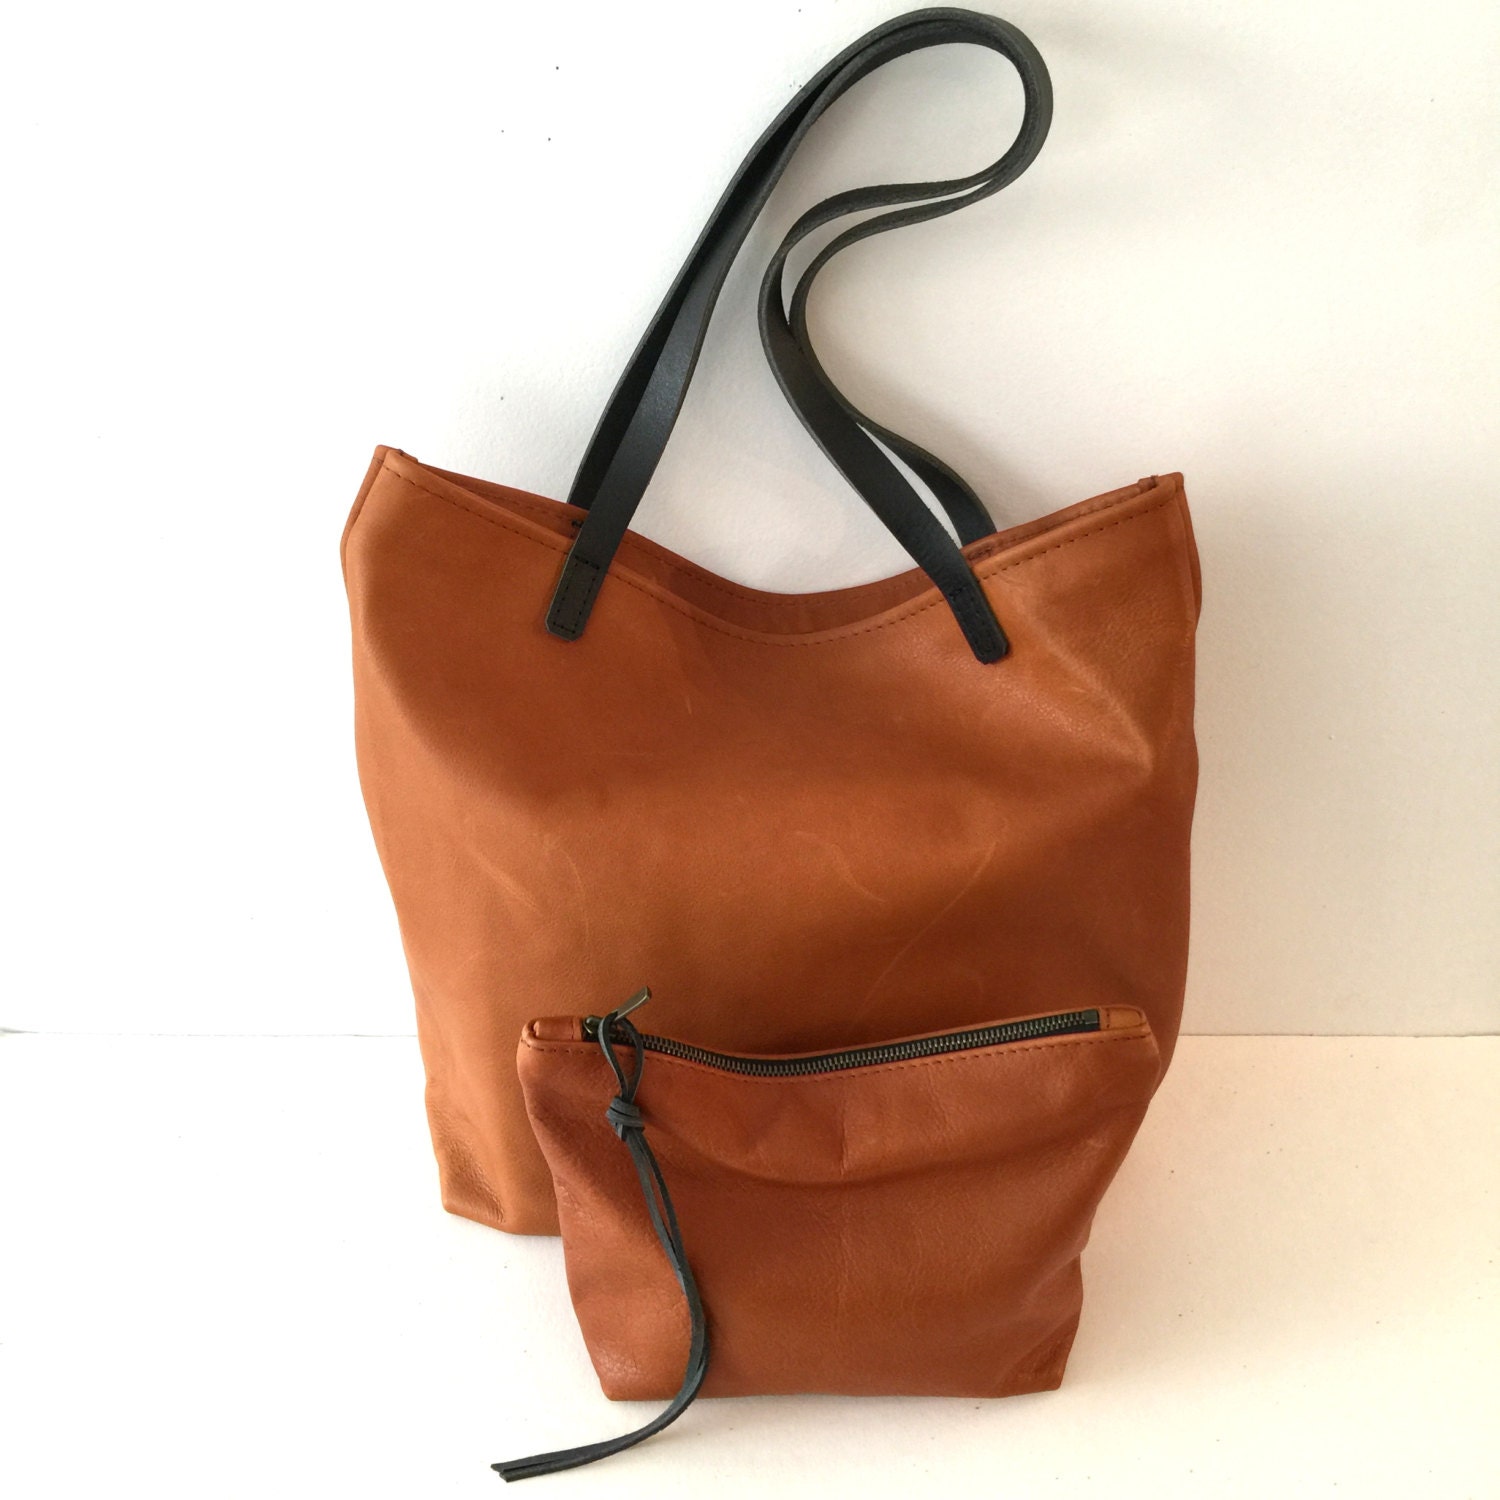 Supple Brown Leather Tote Bag with Black leather straps